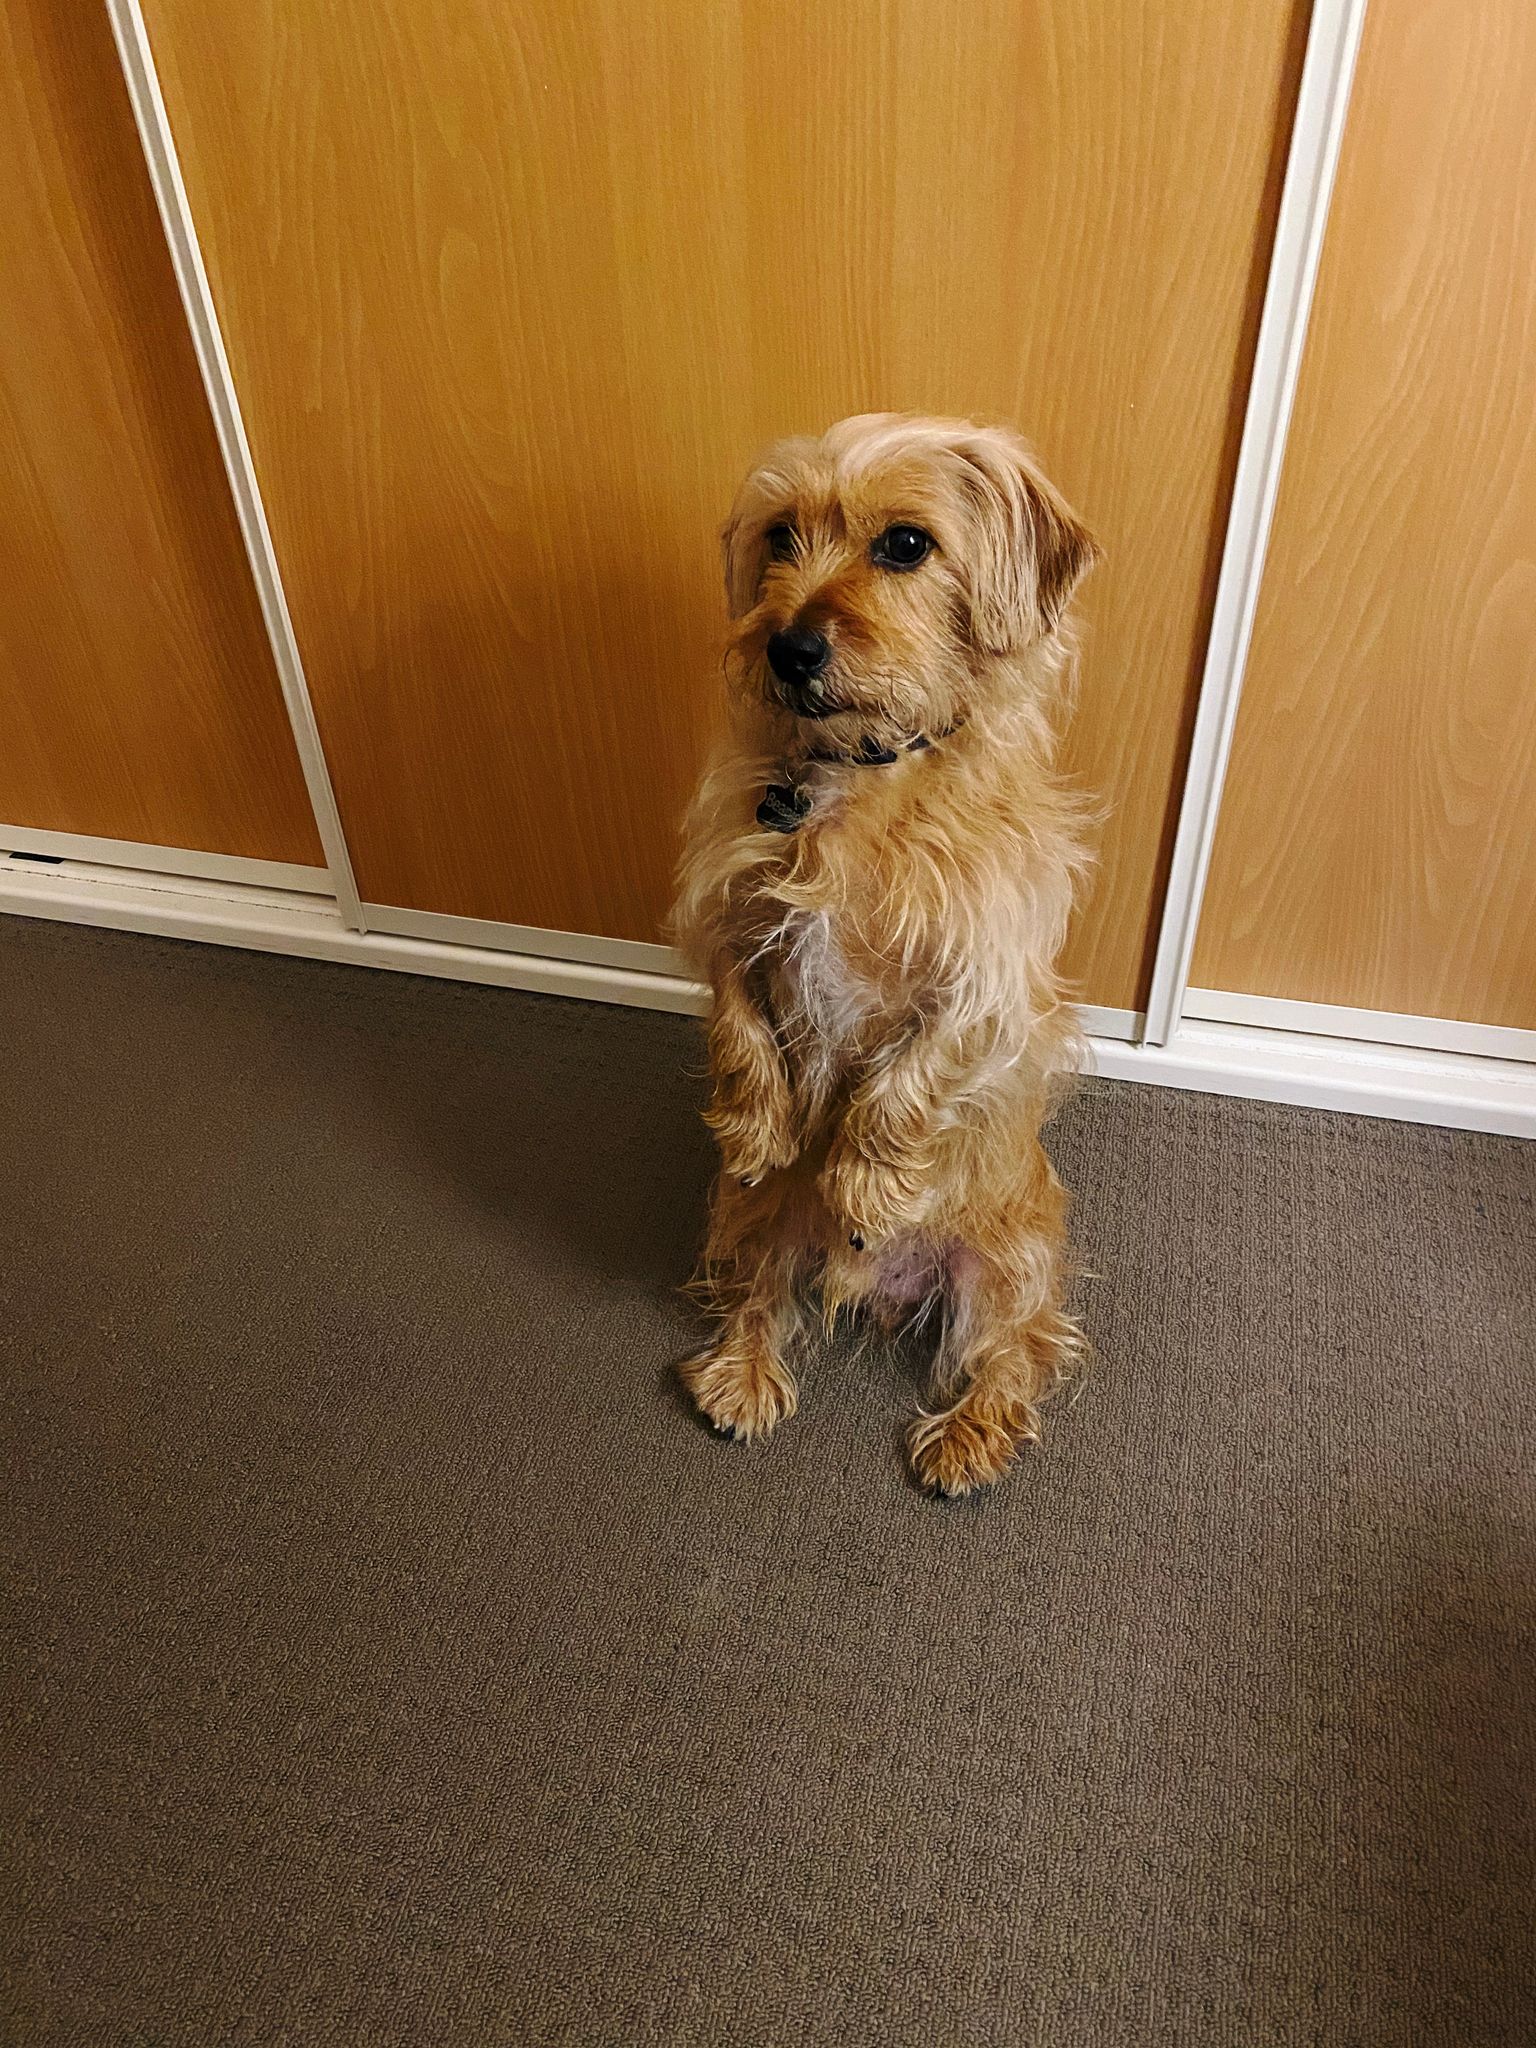 A photo of a small scruffy blonde dog sitting up on his haunches in the middle of the floor, next to a cupboard.